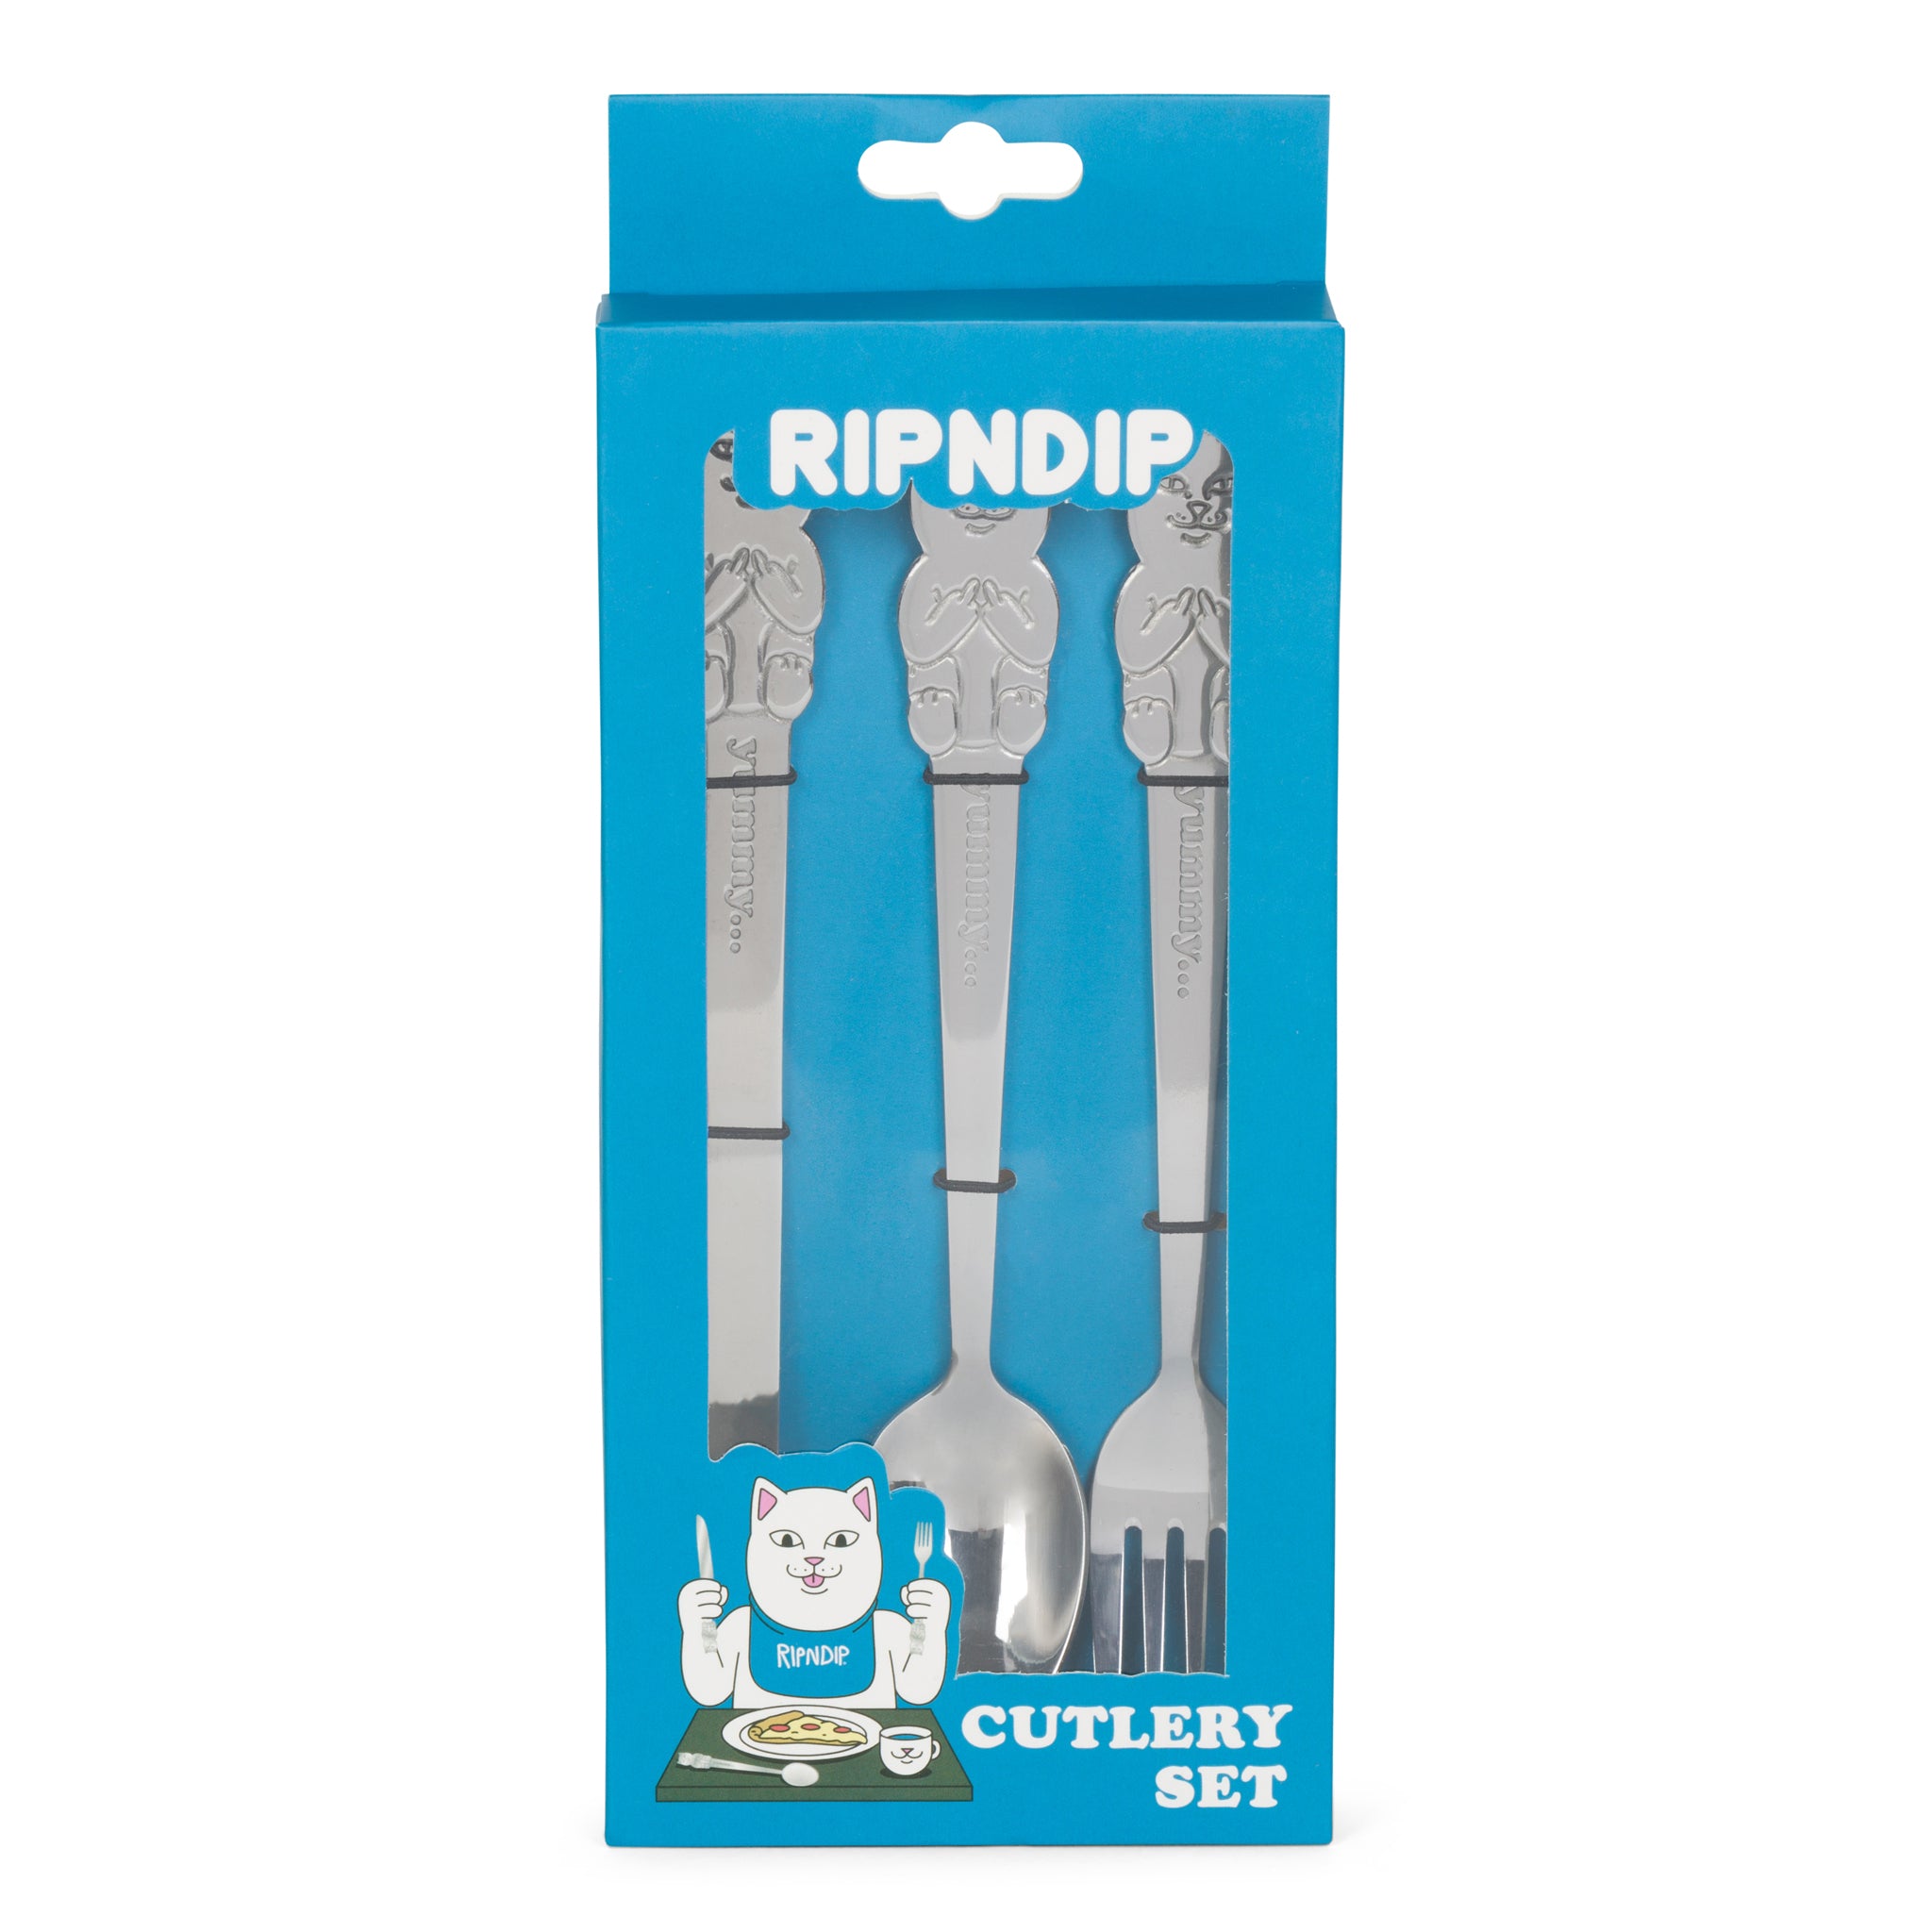 Lord Nermal 3 PC Cutlery Set (Silver)